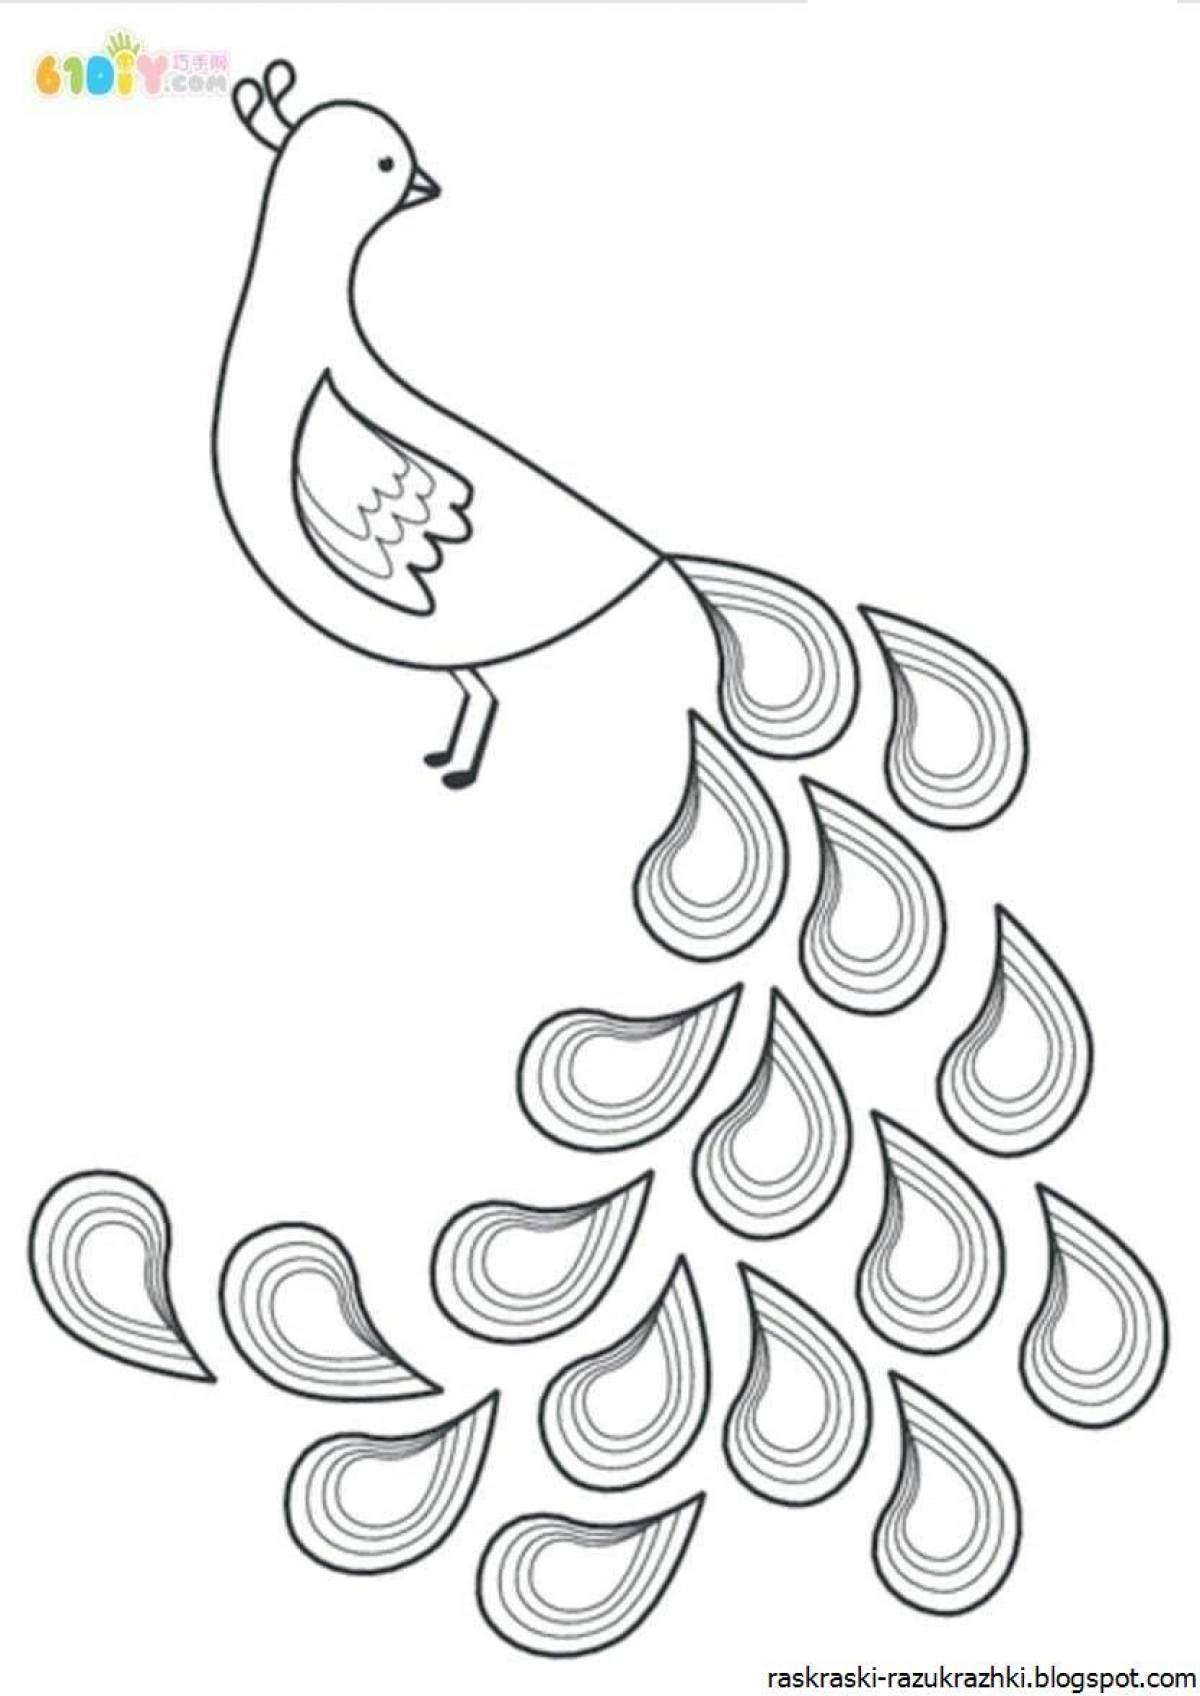 Amazing fire birds coloring pages for kids